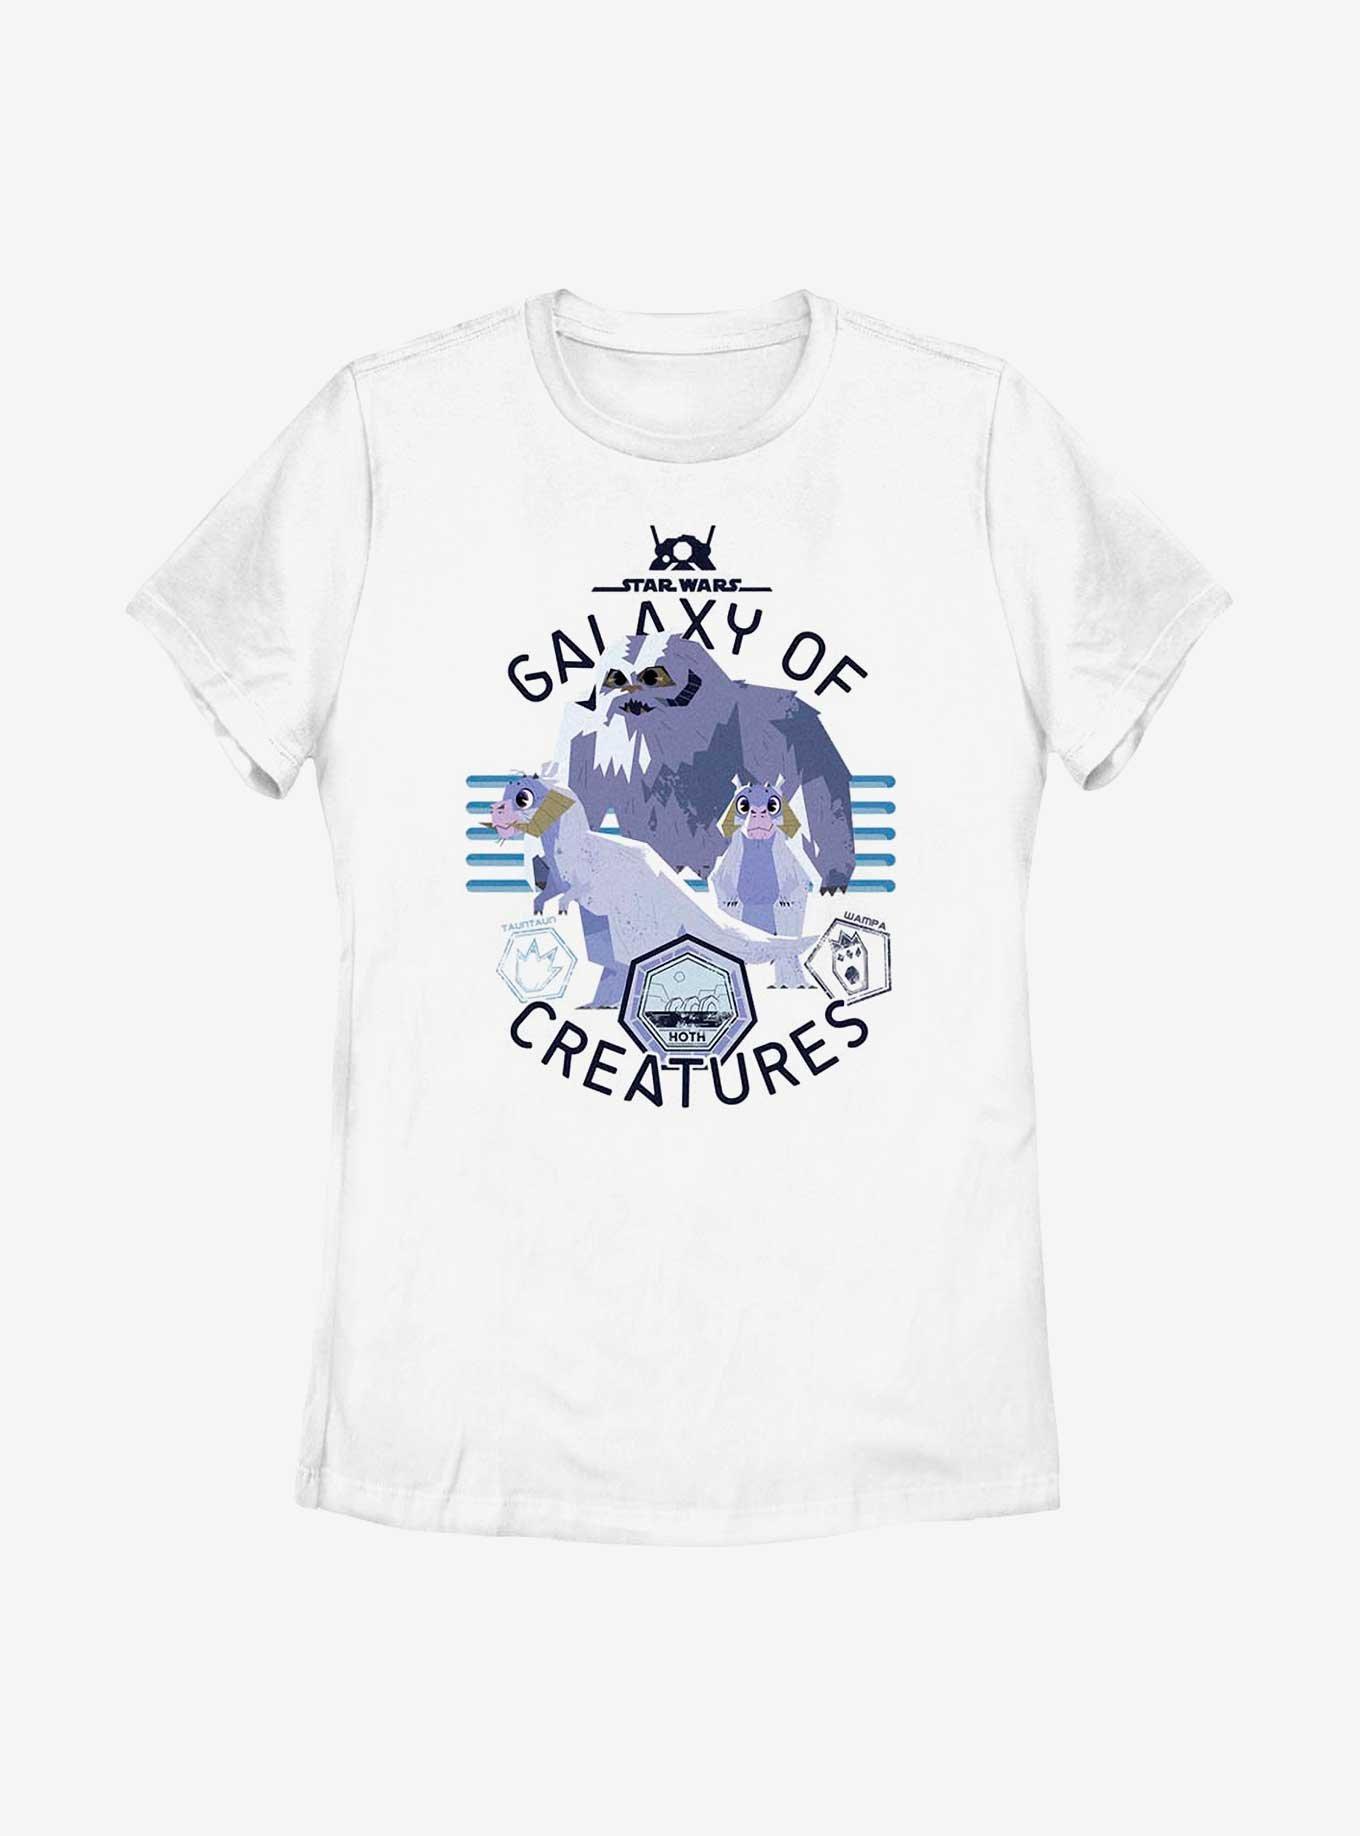 Star Wars Galaxy Of Creatures Hoth Native Species Womens T-Shirt, WHITE, hi-res